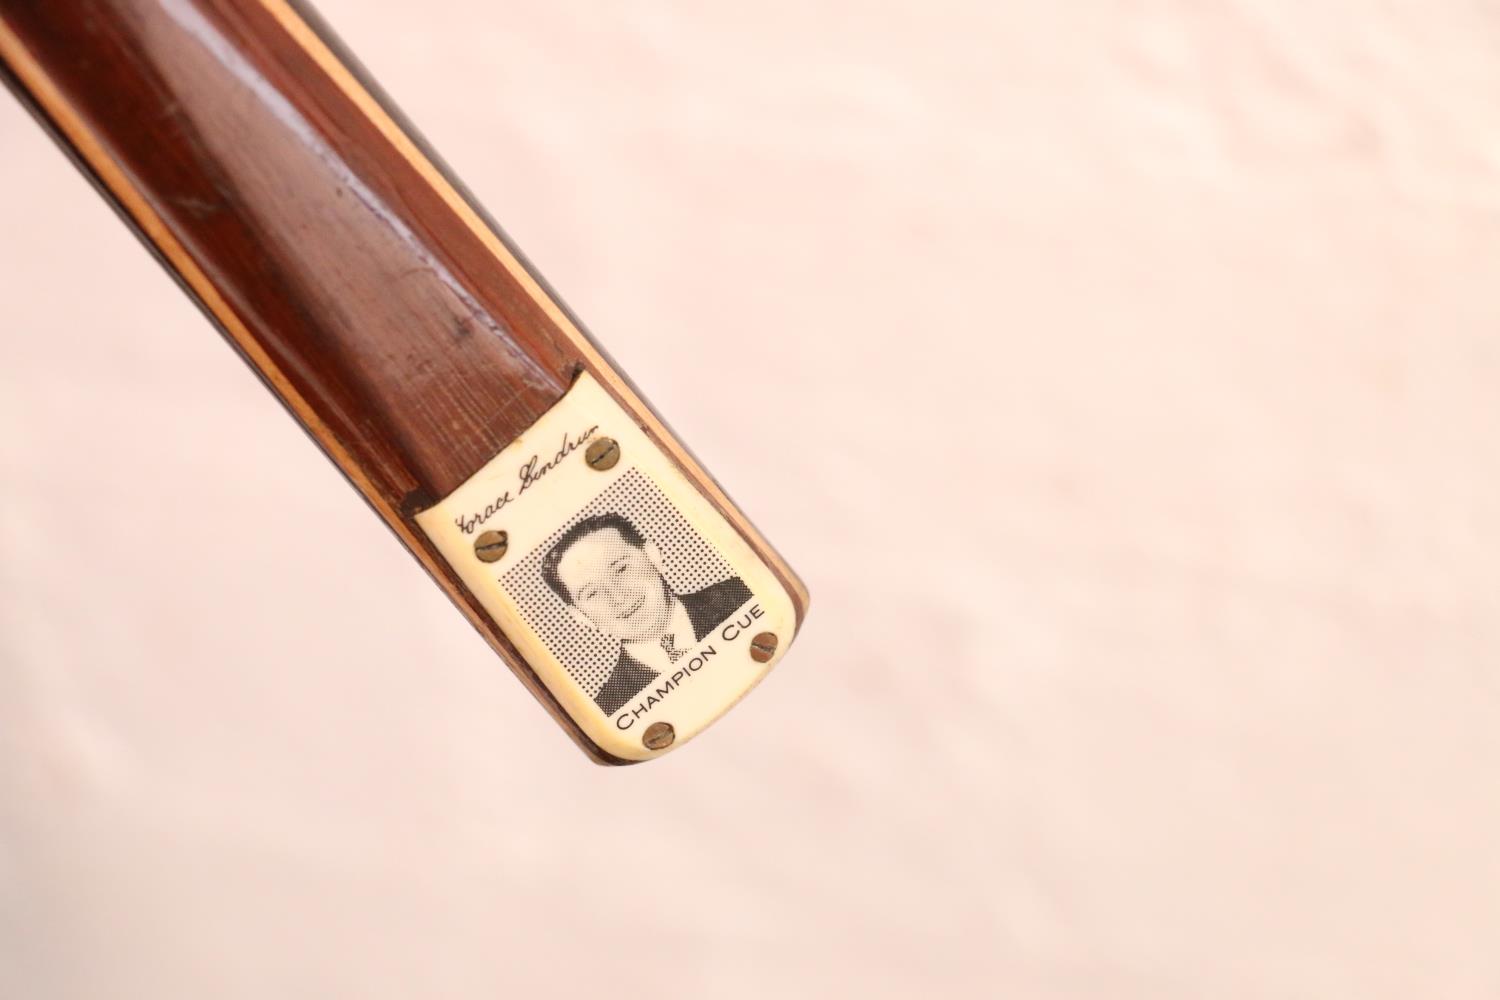 Horace Lindrum Champion cue with ivorine plaque depicting portrait of Lindrum, 147cm long, in - Image 2 of 2